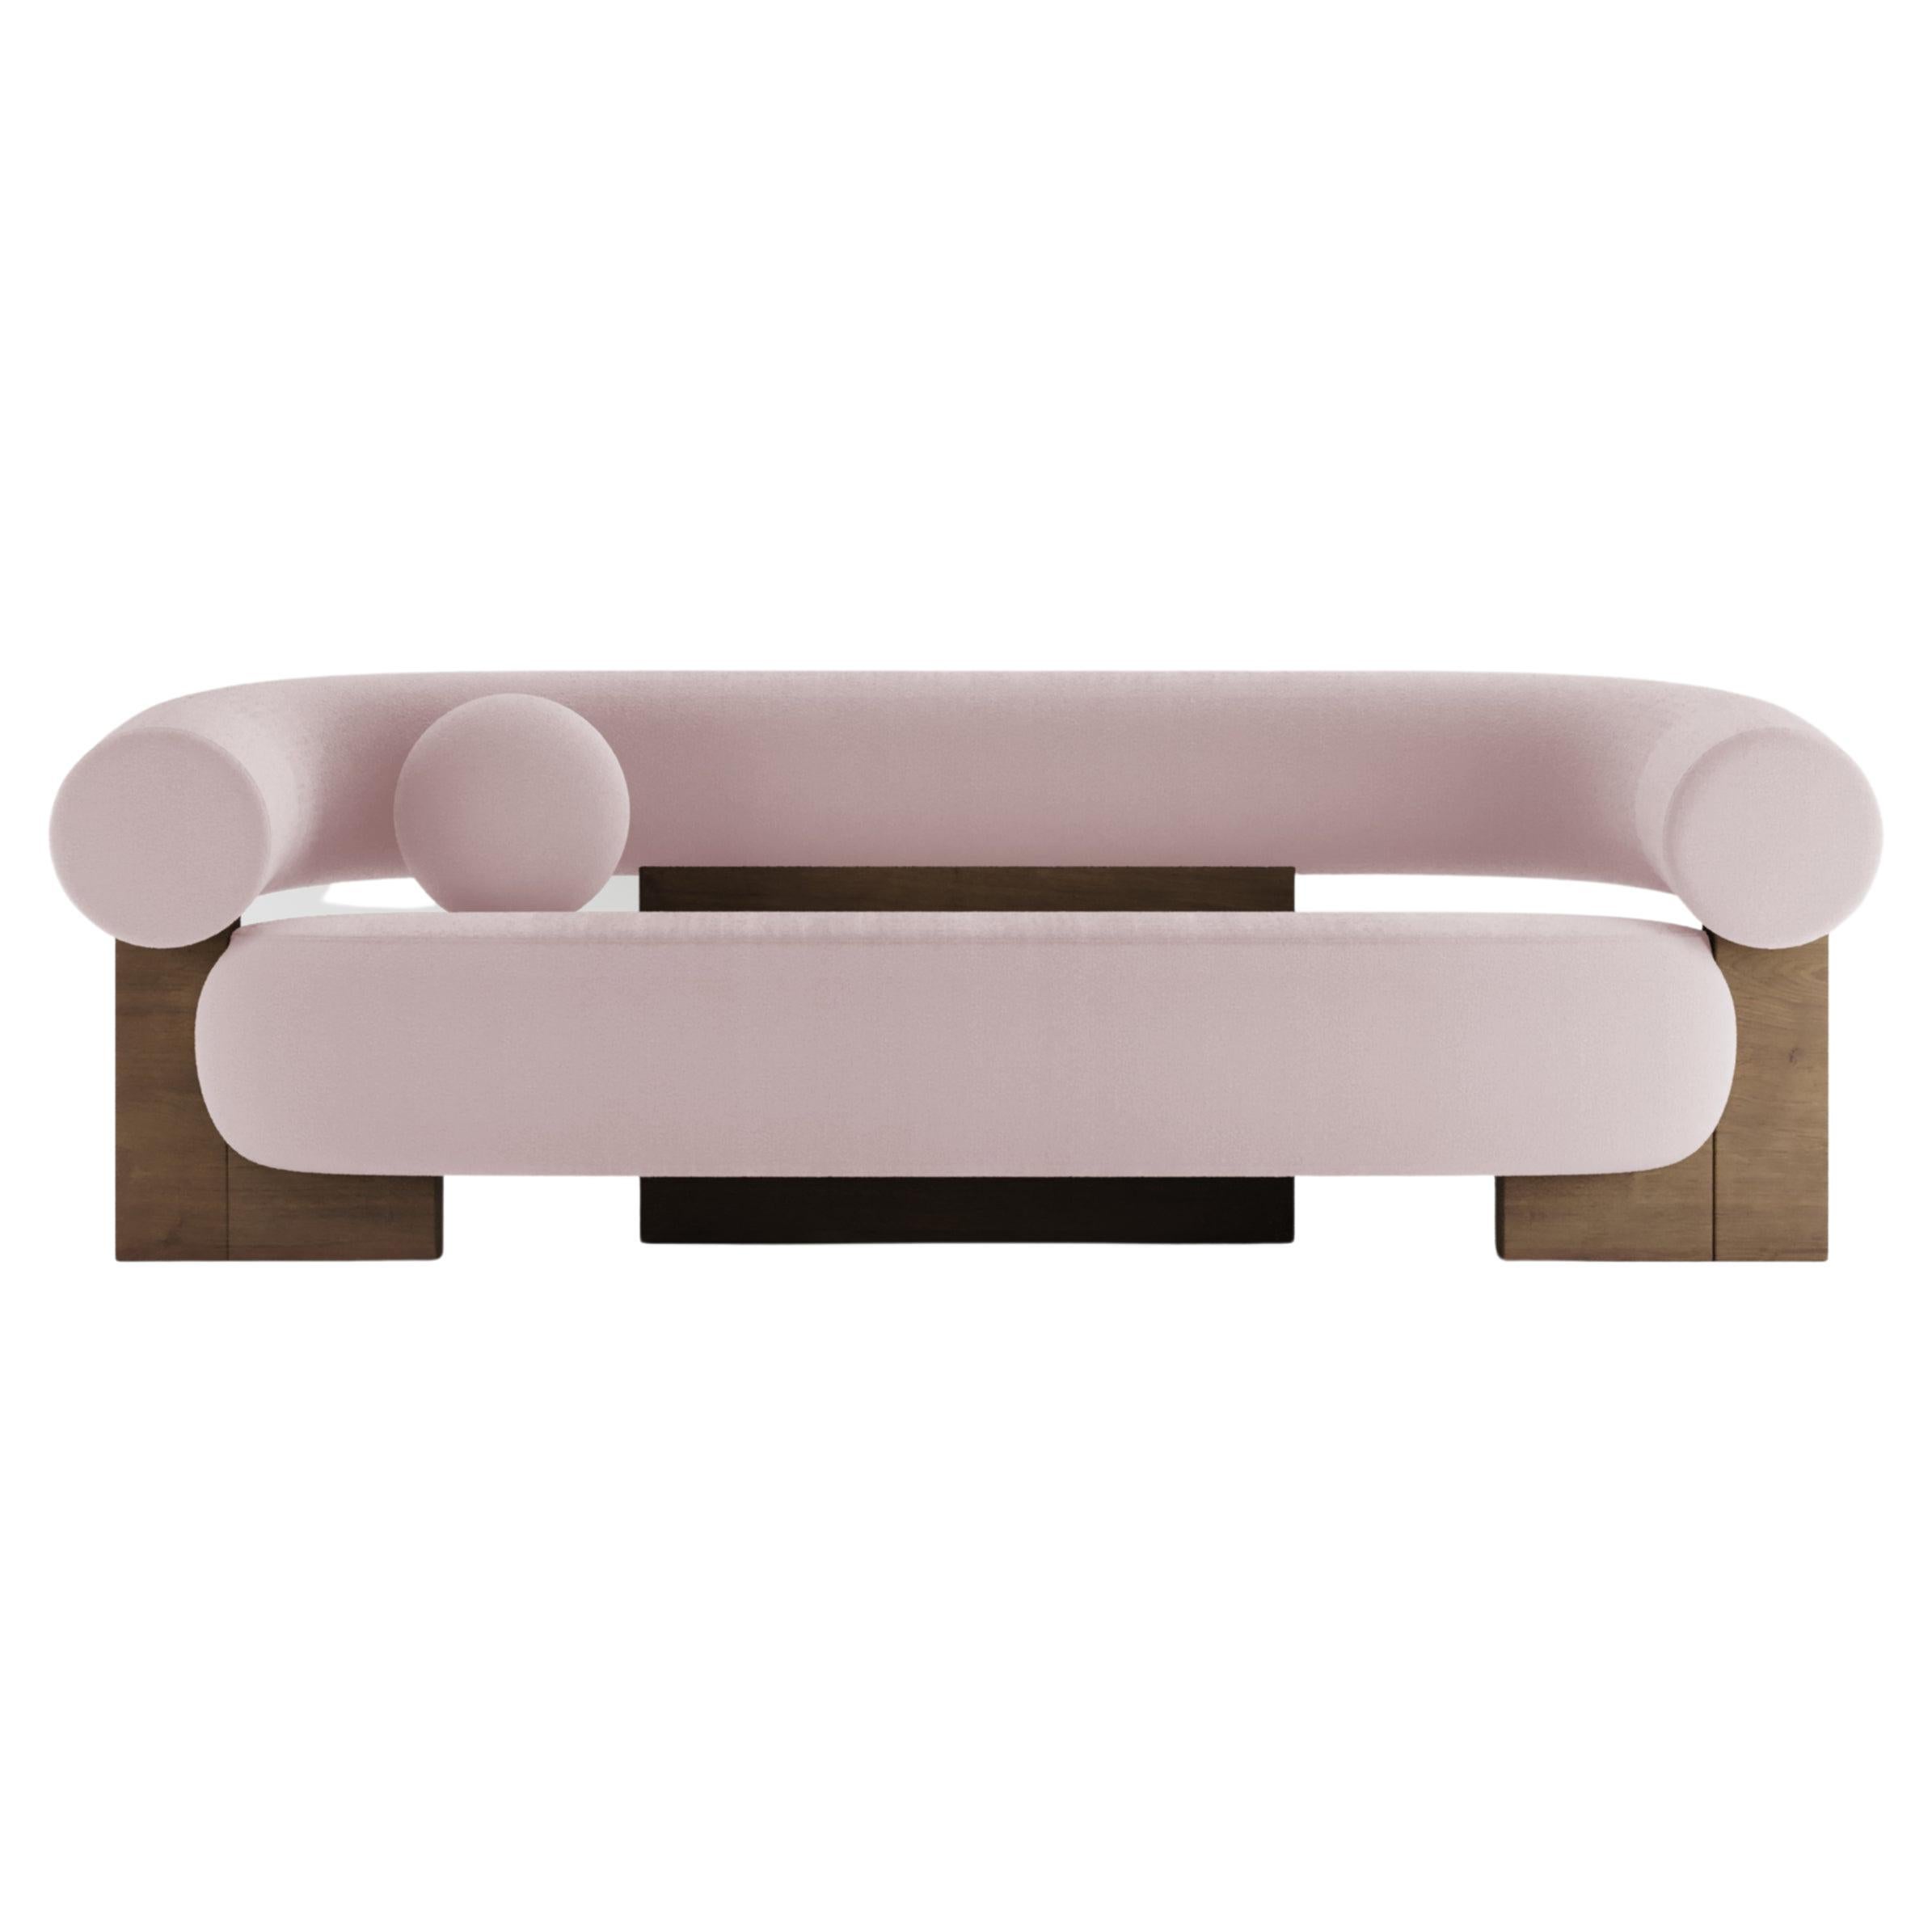 Contemporary Modern Cassete Sofa in Rose & Wood by Collector Studio For Sale